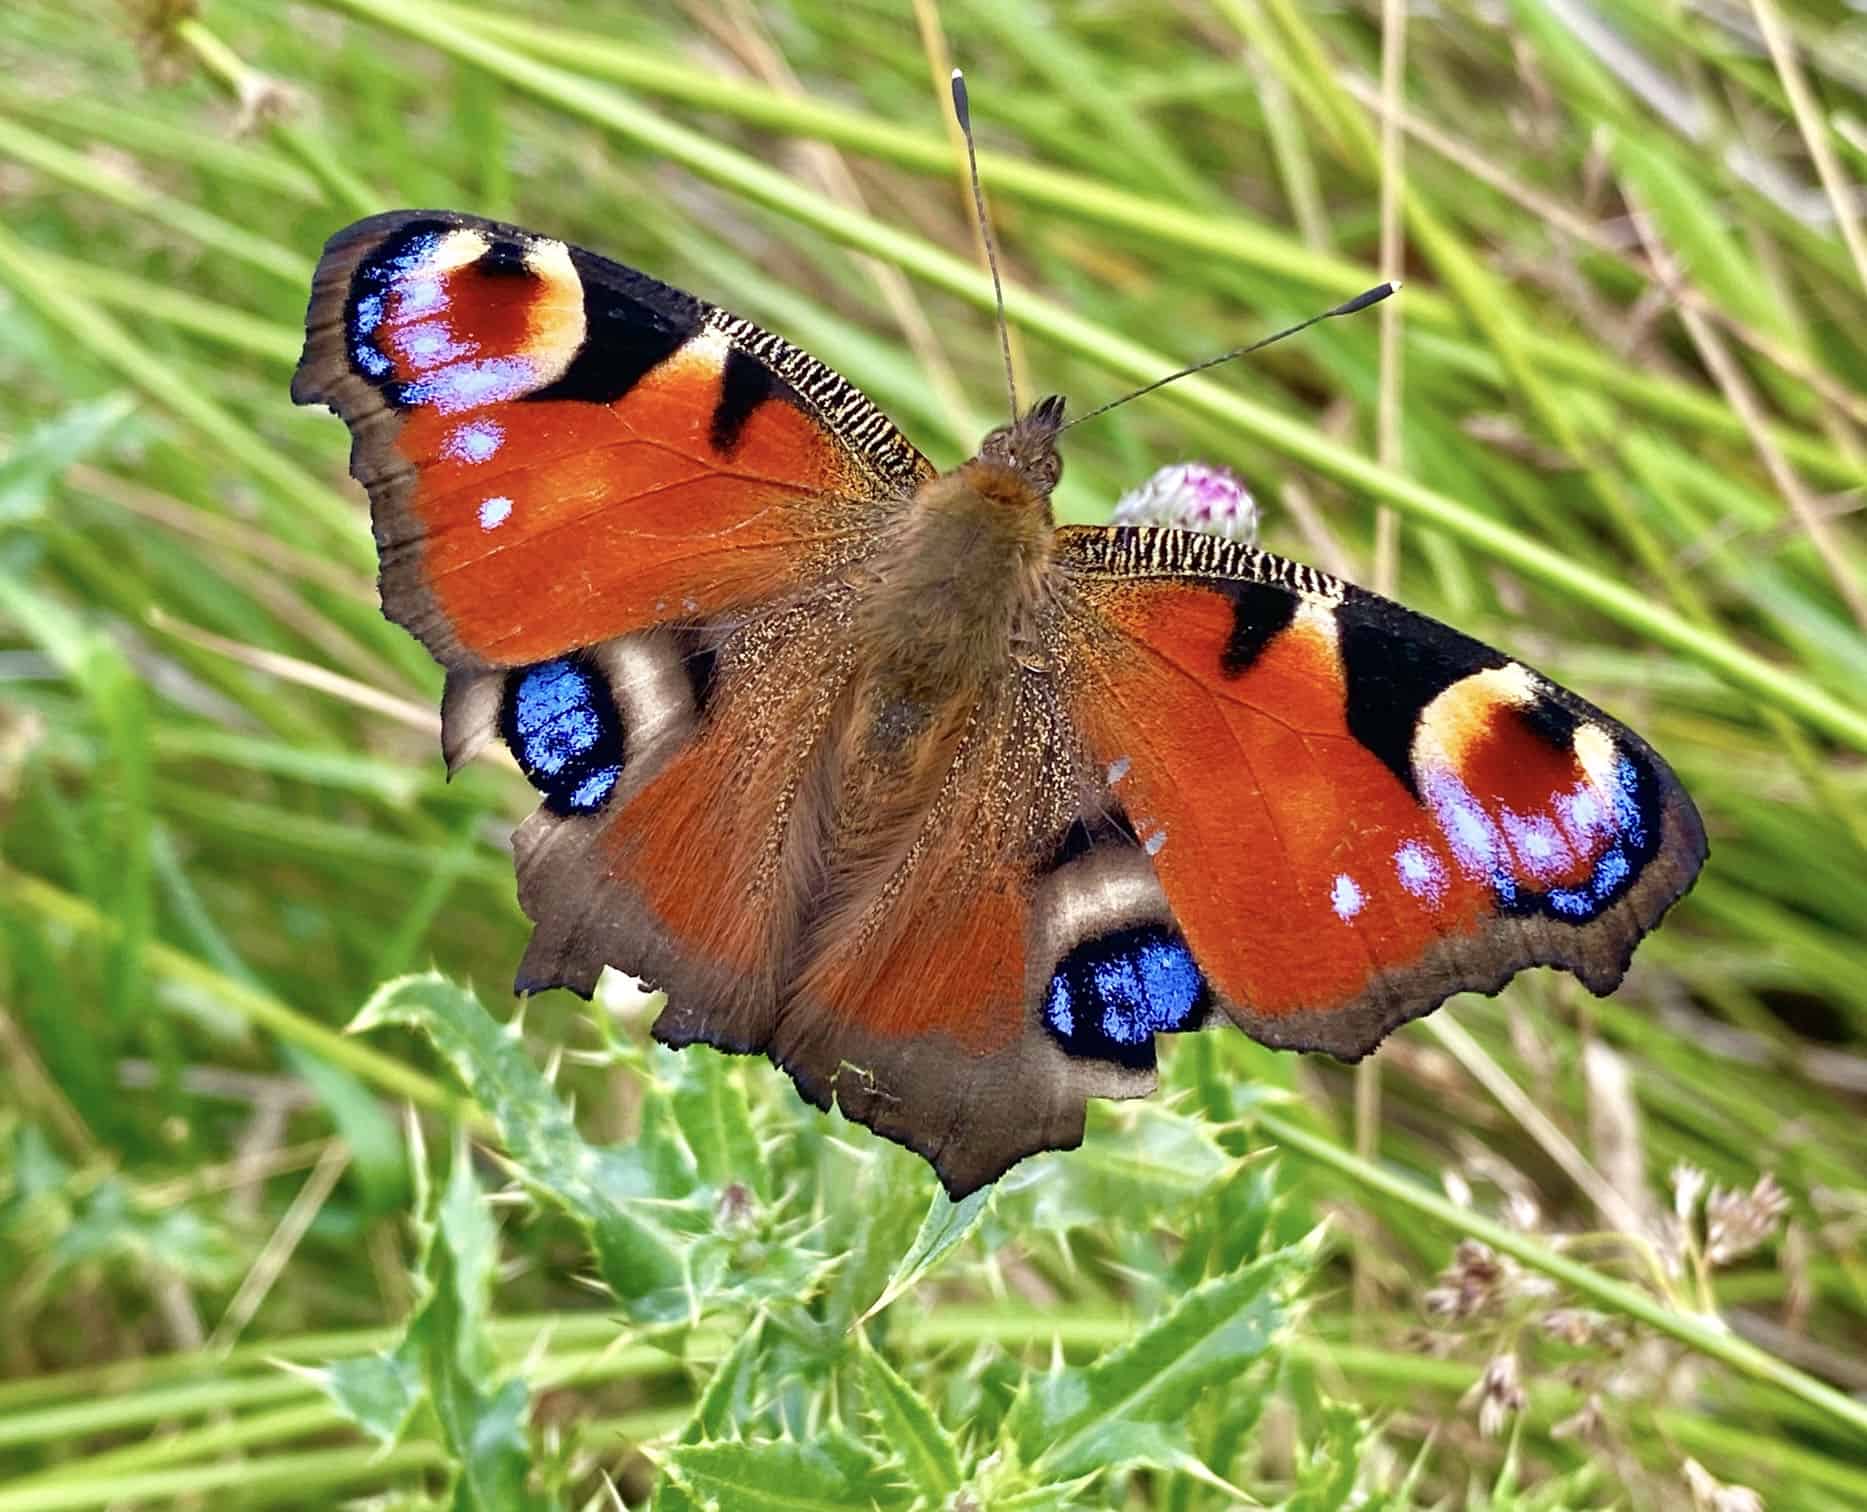 A beautiful peacock butterfly by the side of the path in Danby Dale.